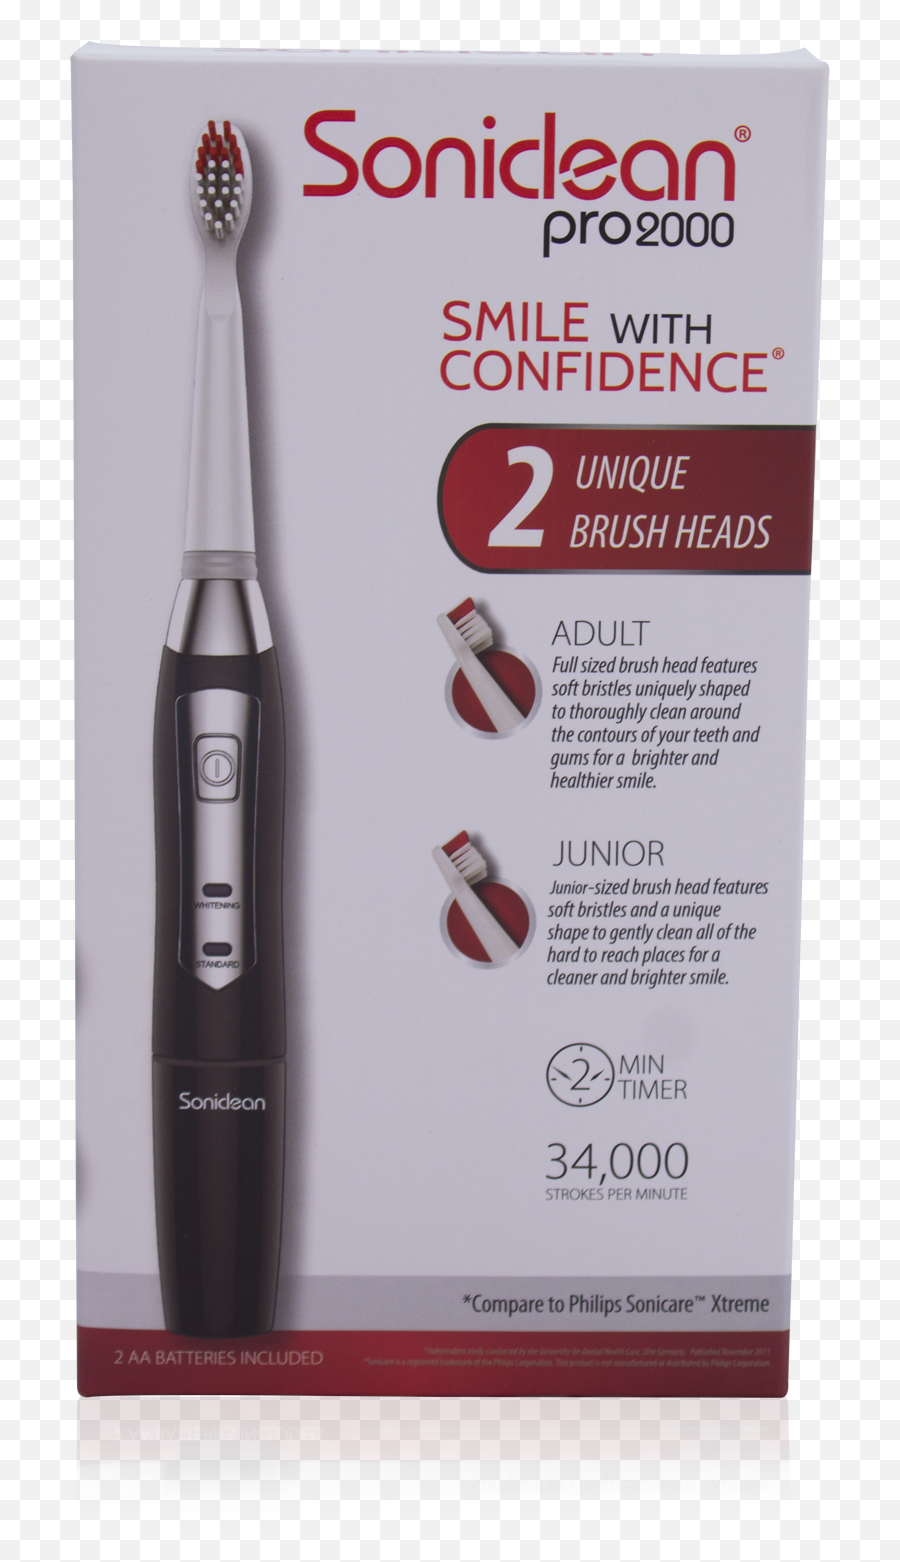 Soniclean Pro 2000 U2013 Brush Buddies Emoji,How Do You Type Out The Smile With Teeth Emoticon In Facebook